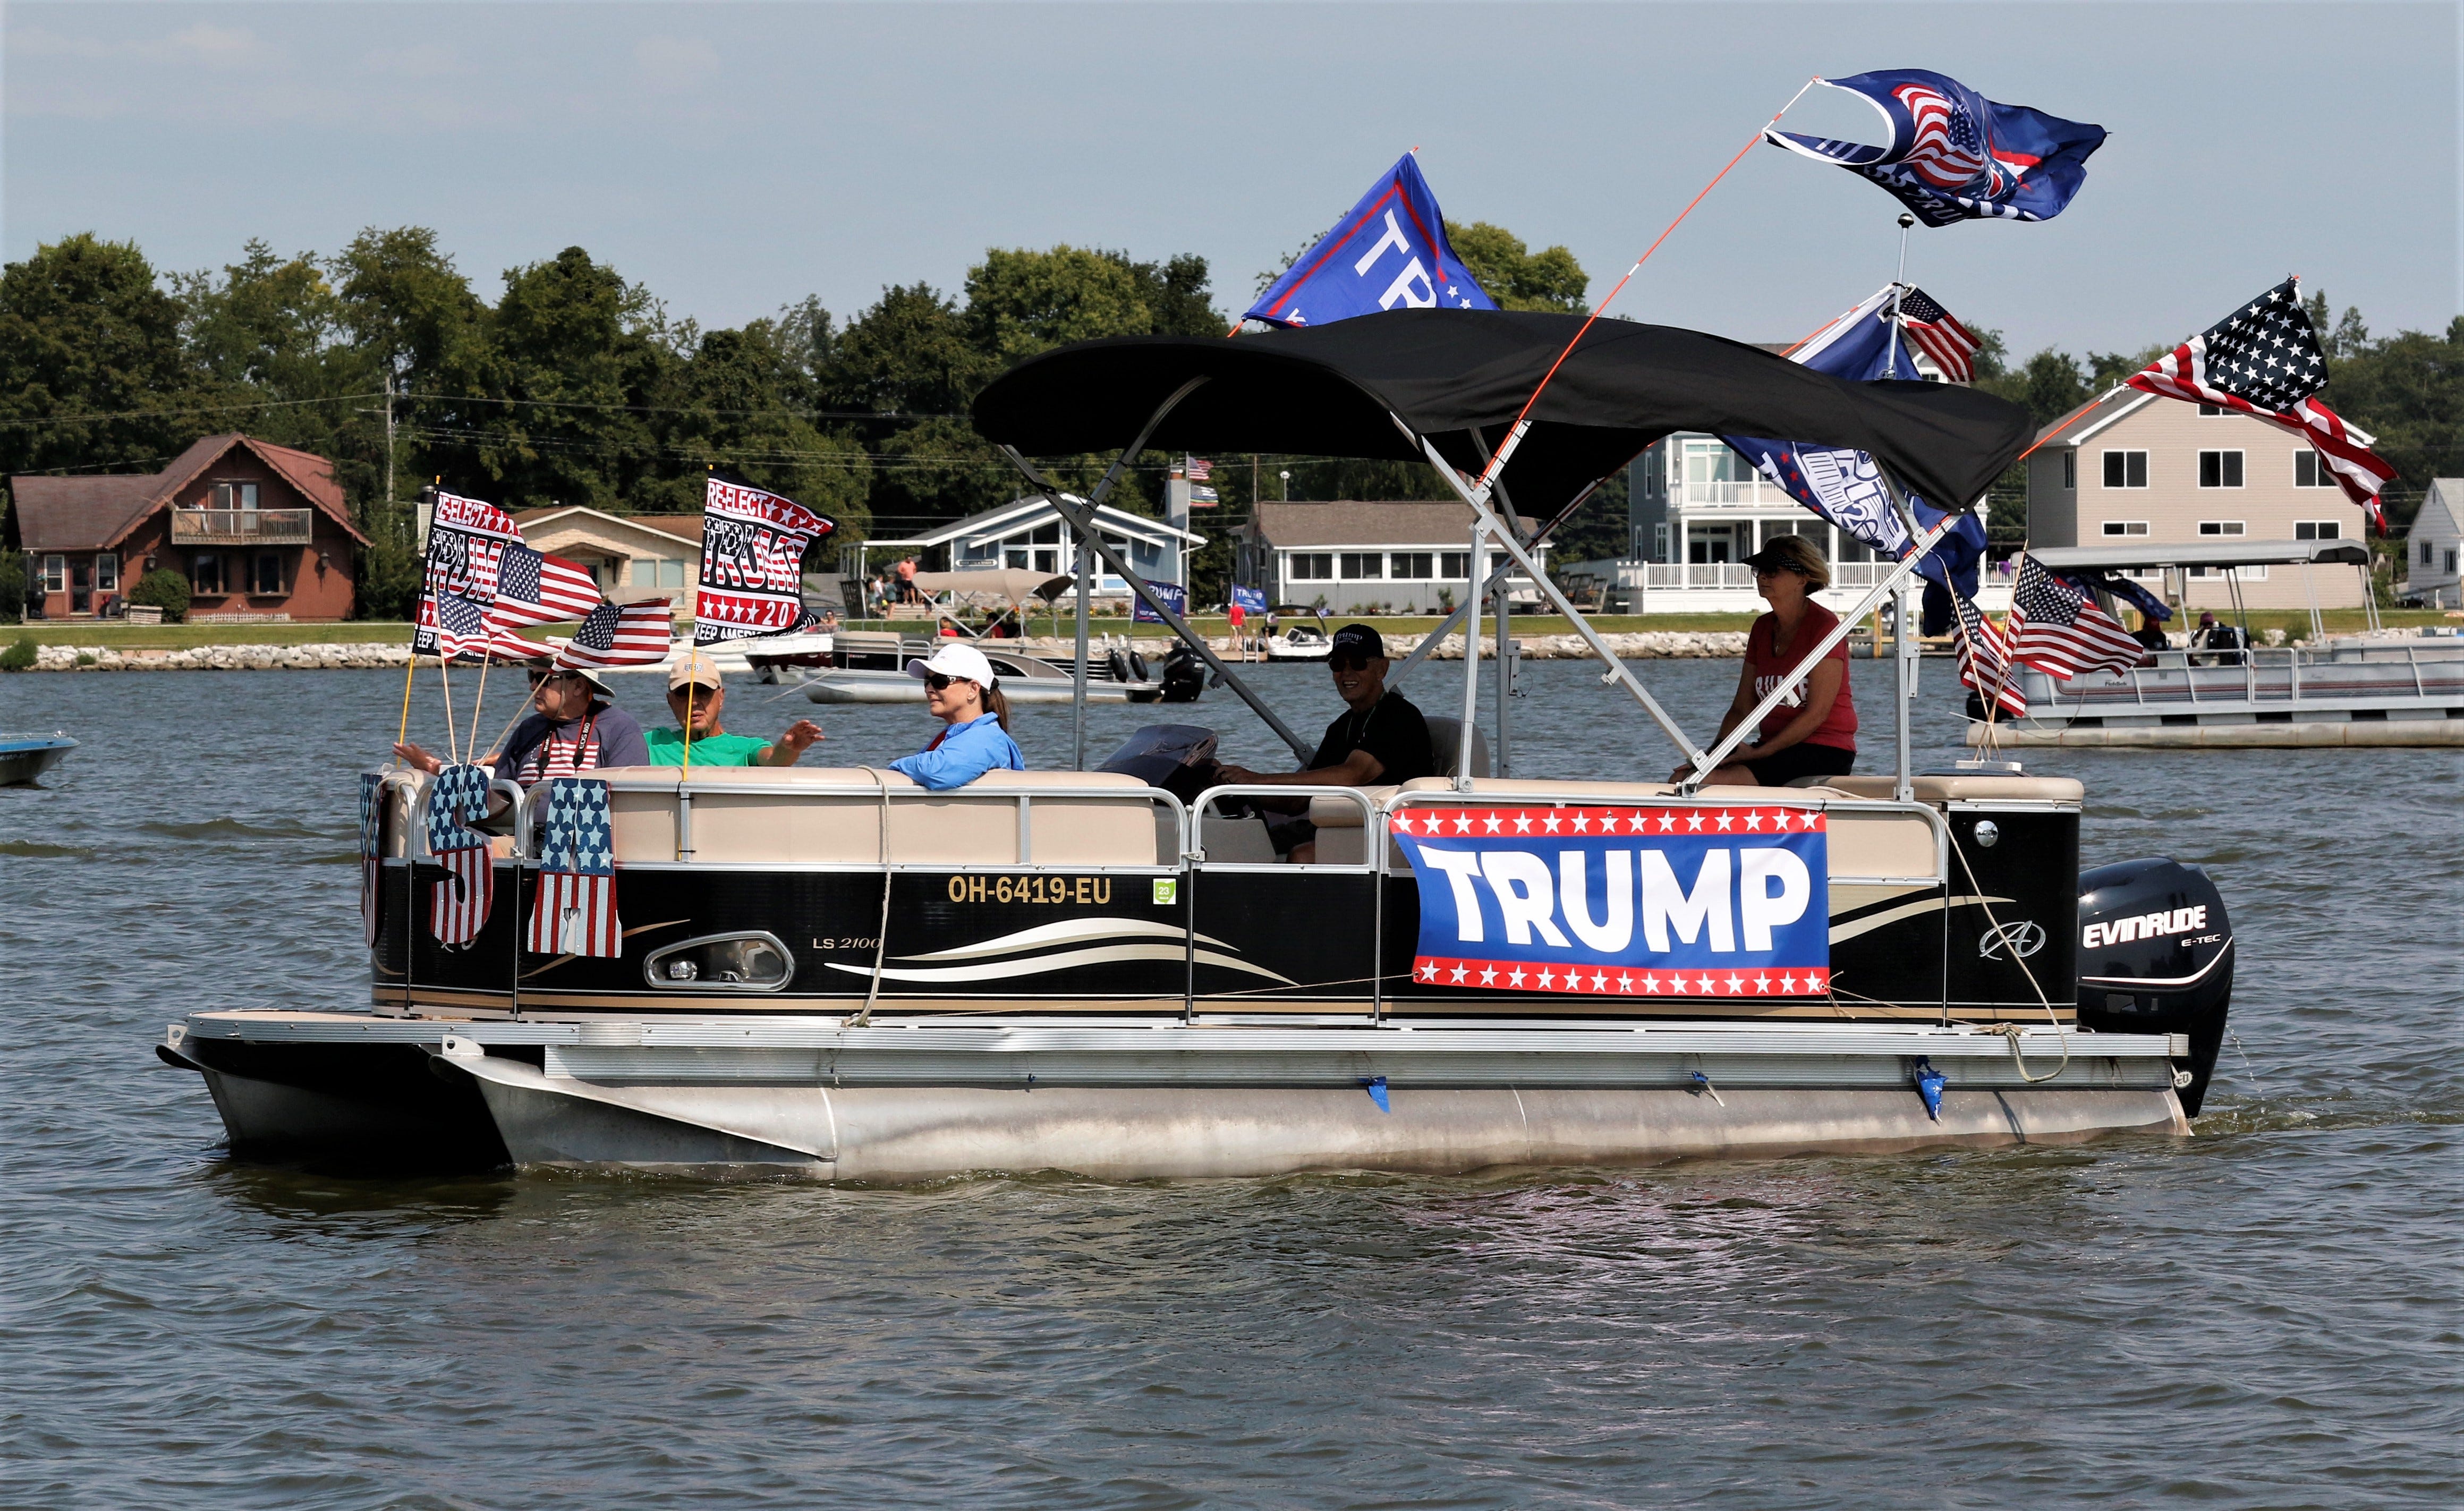 Hundreds of boats come to Buckeye Lake for President Trump parade